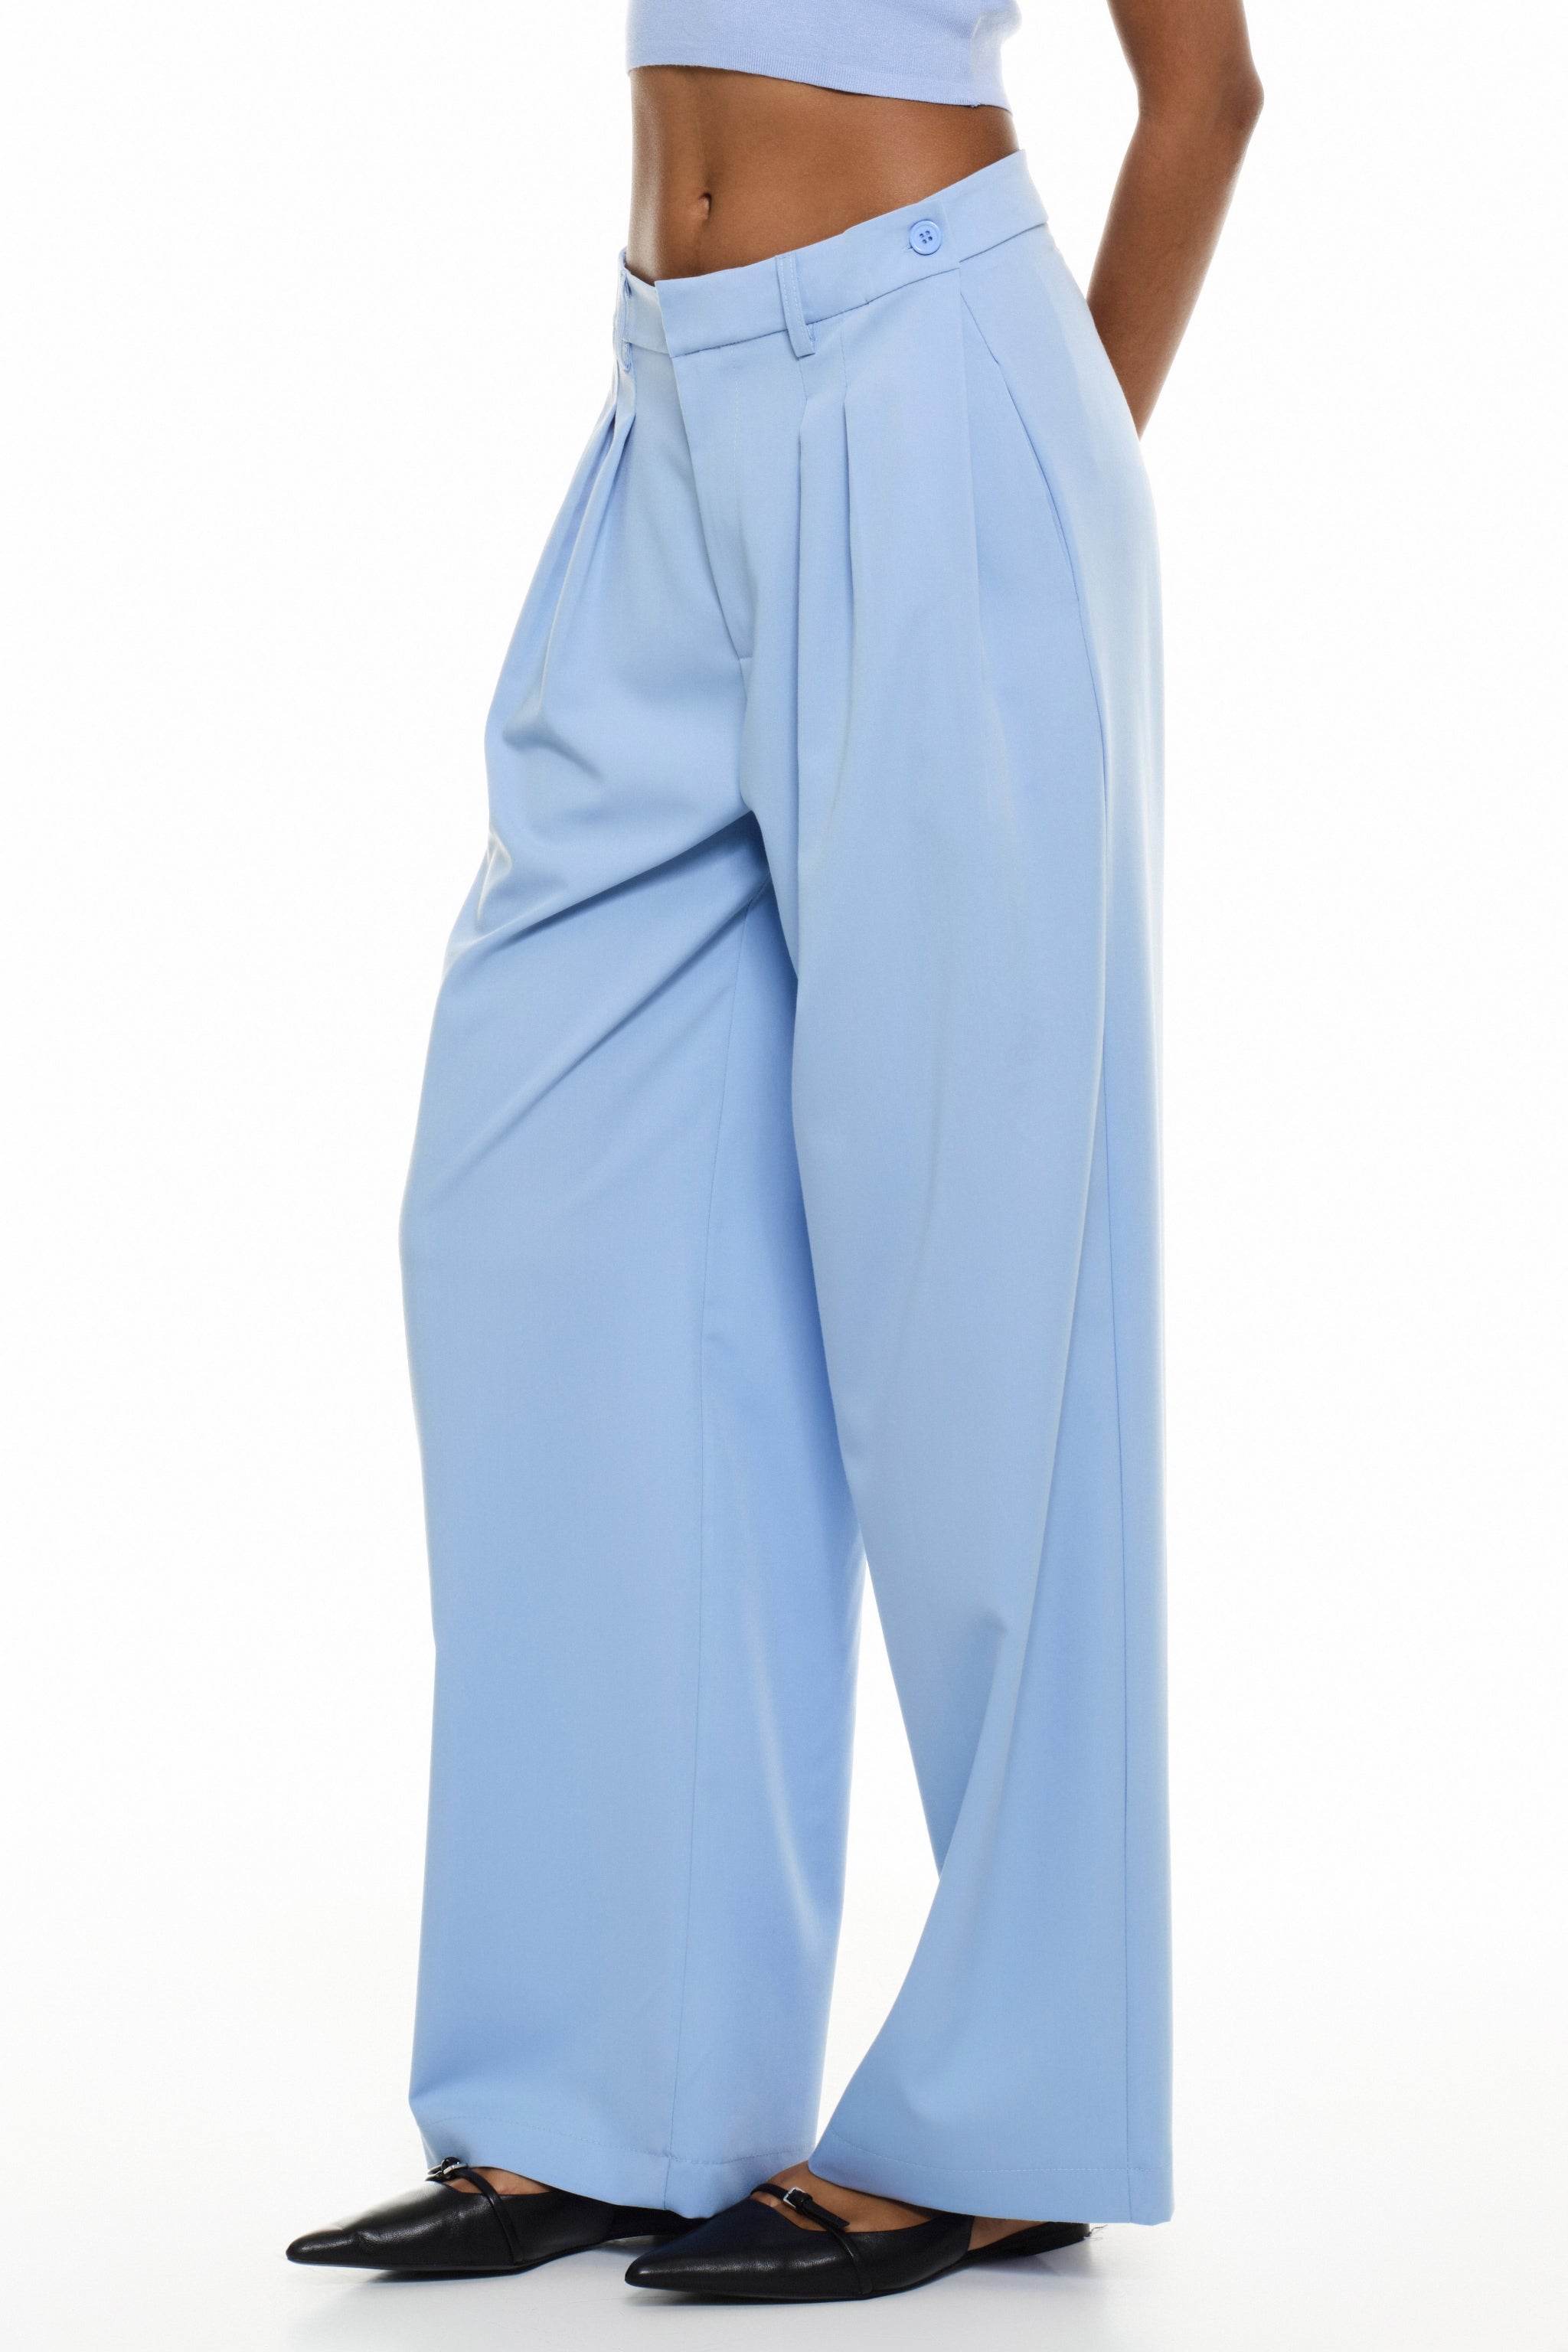 SKY BLUE LOOSE FIT TROUSERS